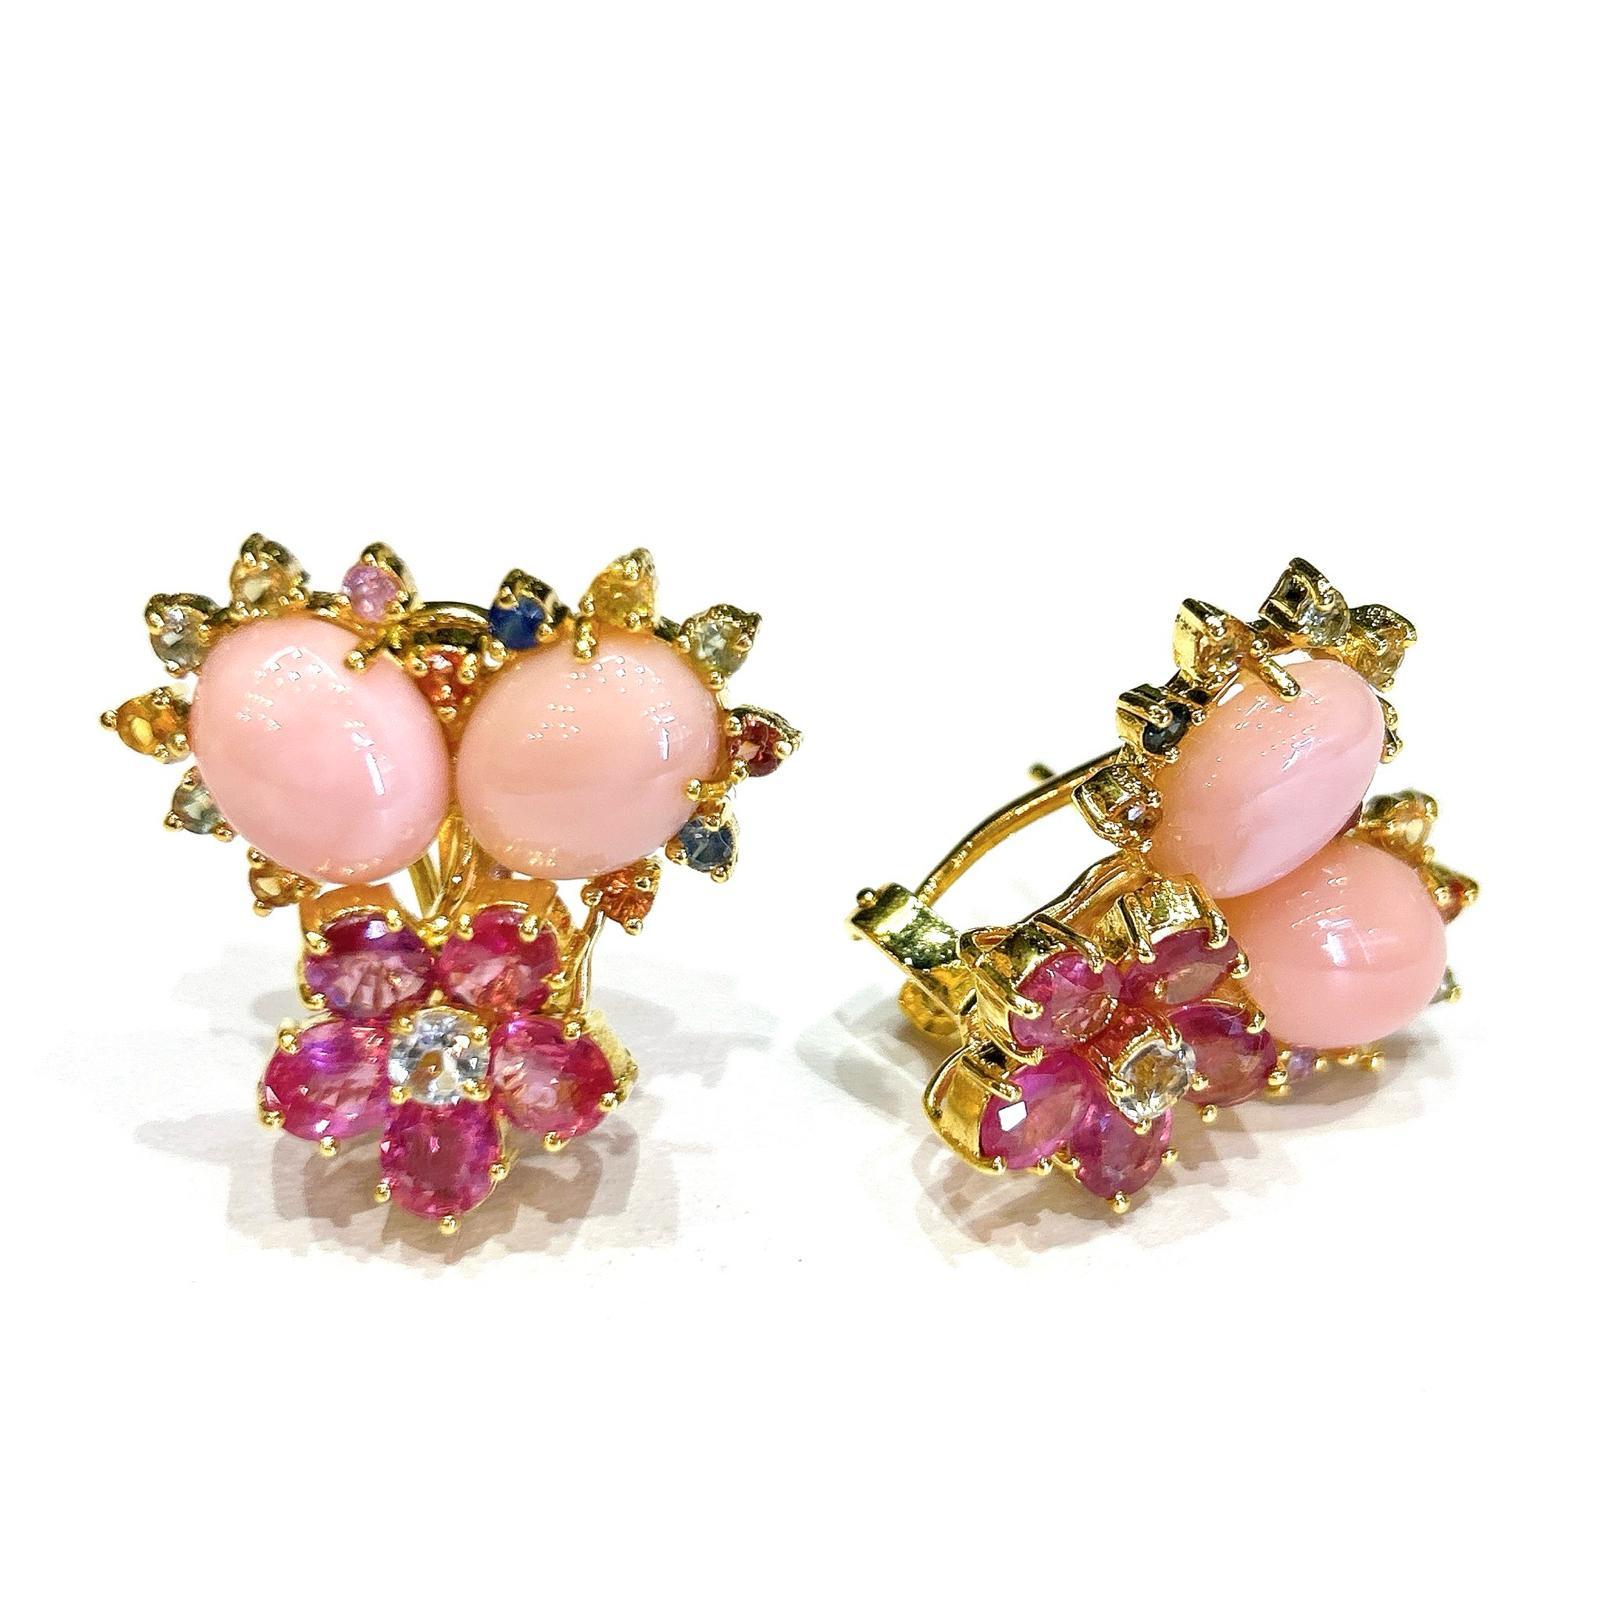 Bochic “Orient” Ruby, Coral & Multi Sapphire Earrings Set In 18K & Silver  In New Condition For Sale In New York, NY